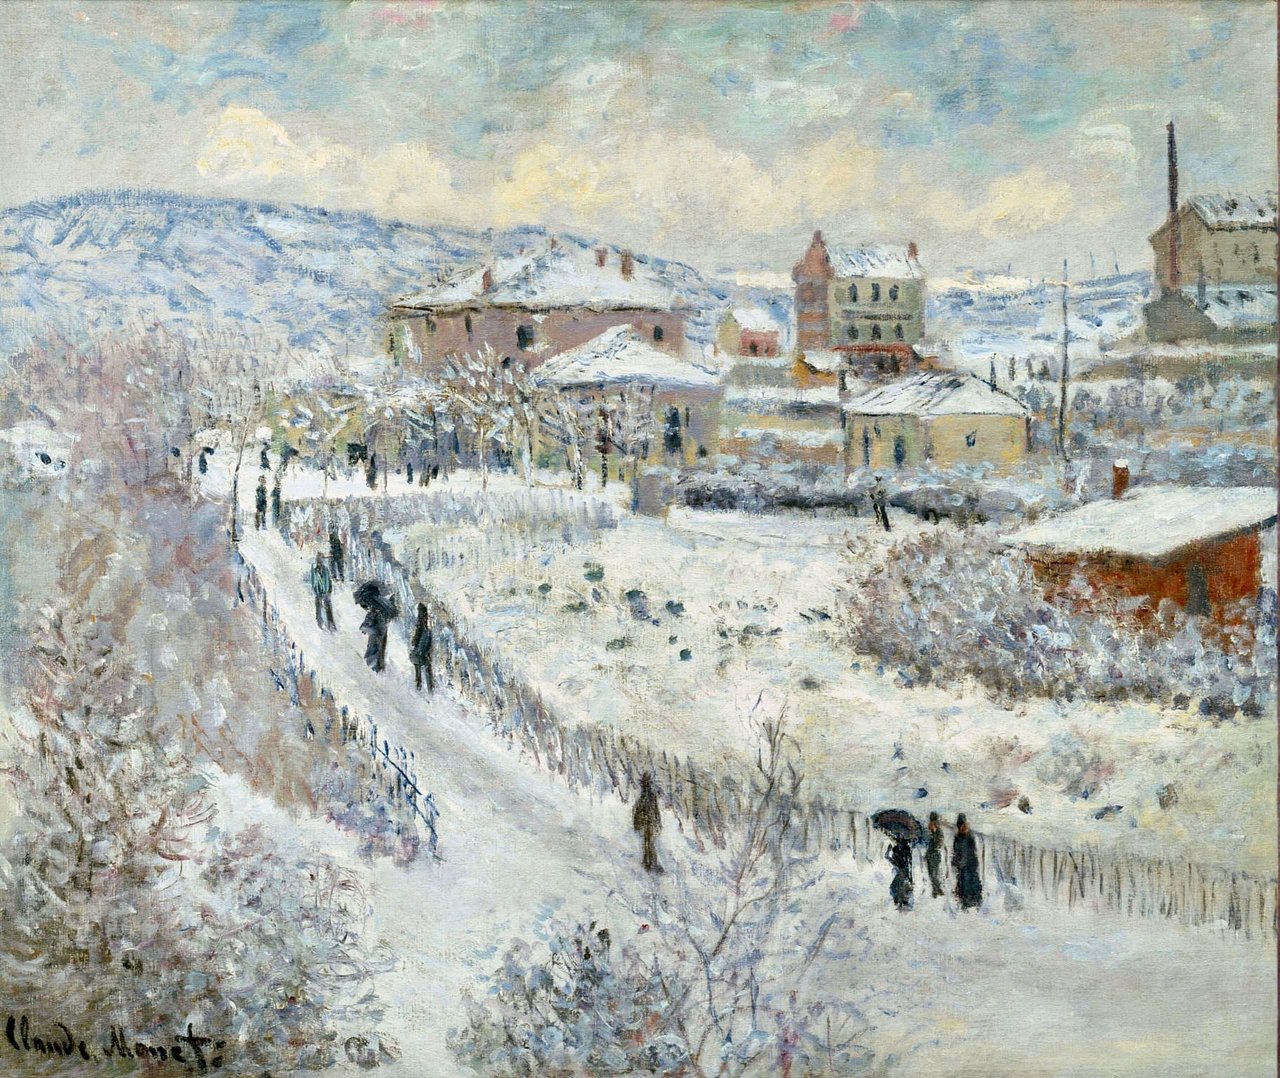 View of Argenteuil in the Snow, 1875 https://www.wikiart.org/en/claude-monet/view-of-argenteuil-in-the-snow #frenchart #impressionism https://t.co/KxKUUkGGPQ